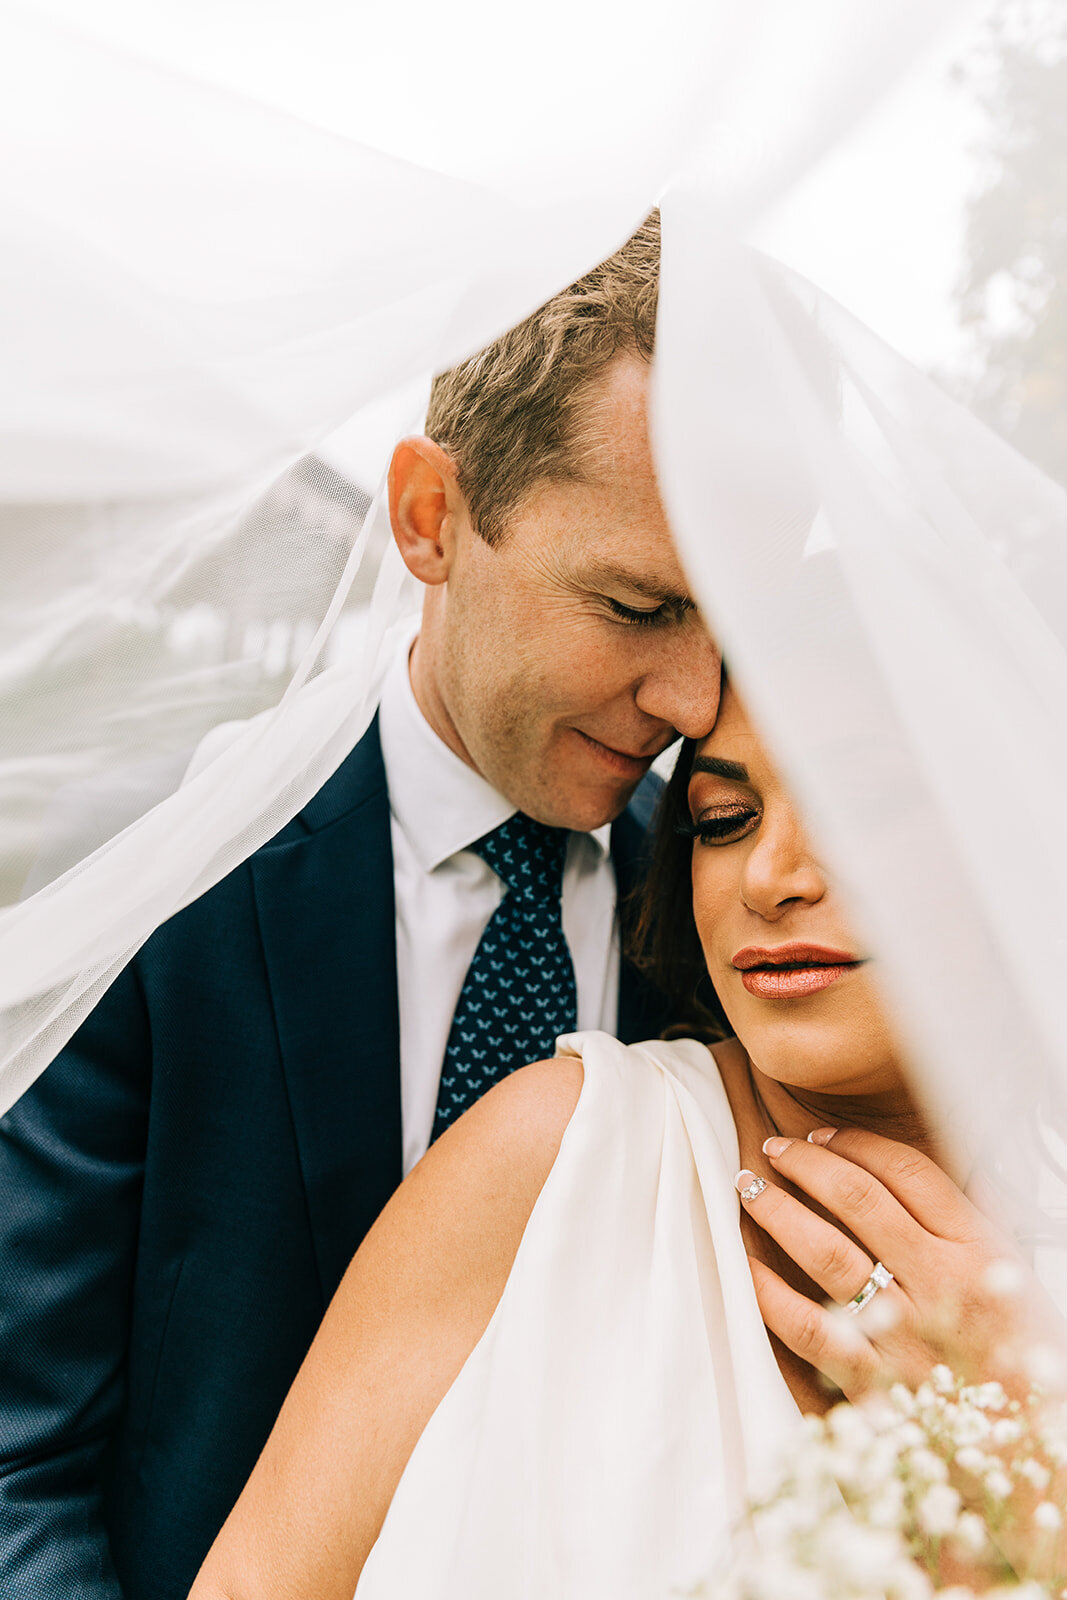 A bride and groom embracing each other under a veil